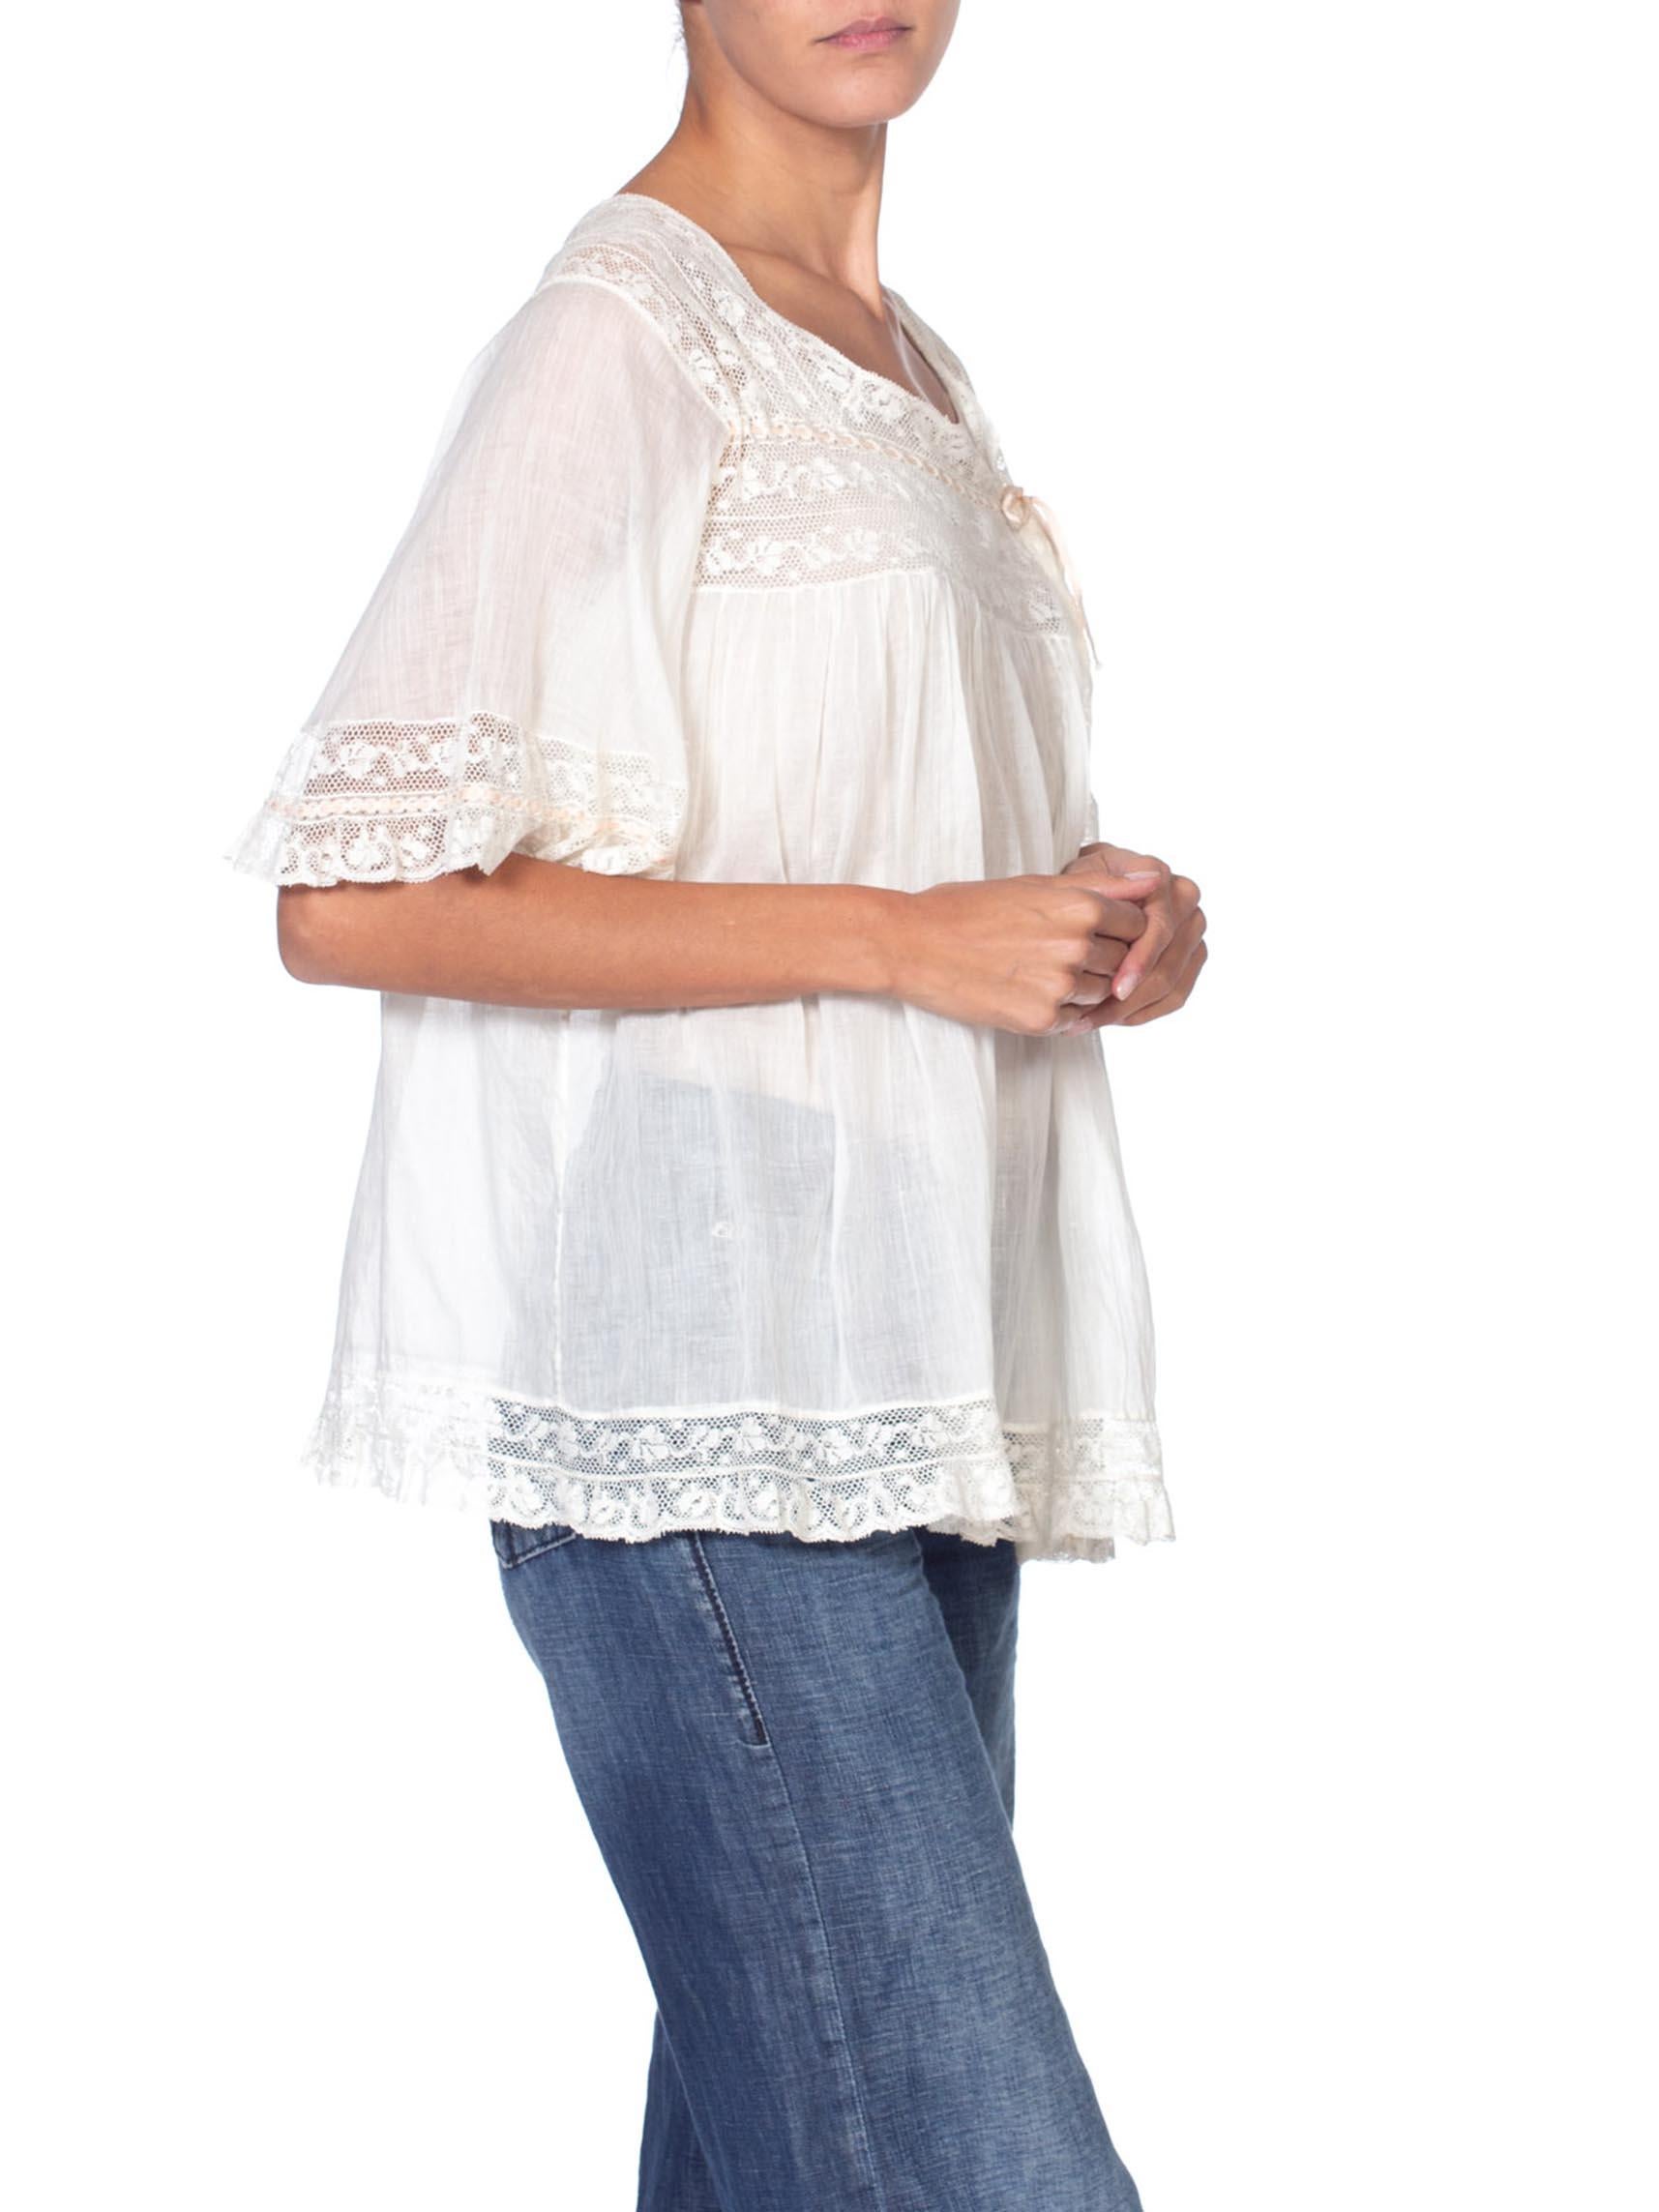 Victorian White Cotton Voile & Lace Oversized Boho Bed Jacket Top 1